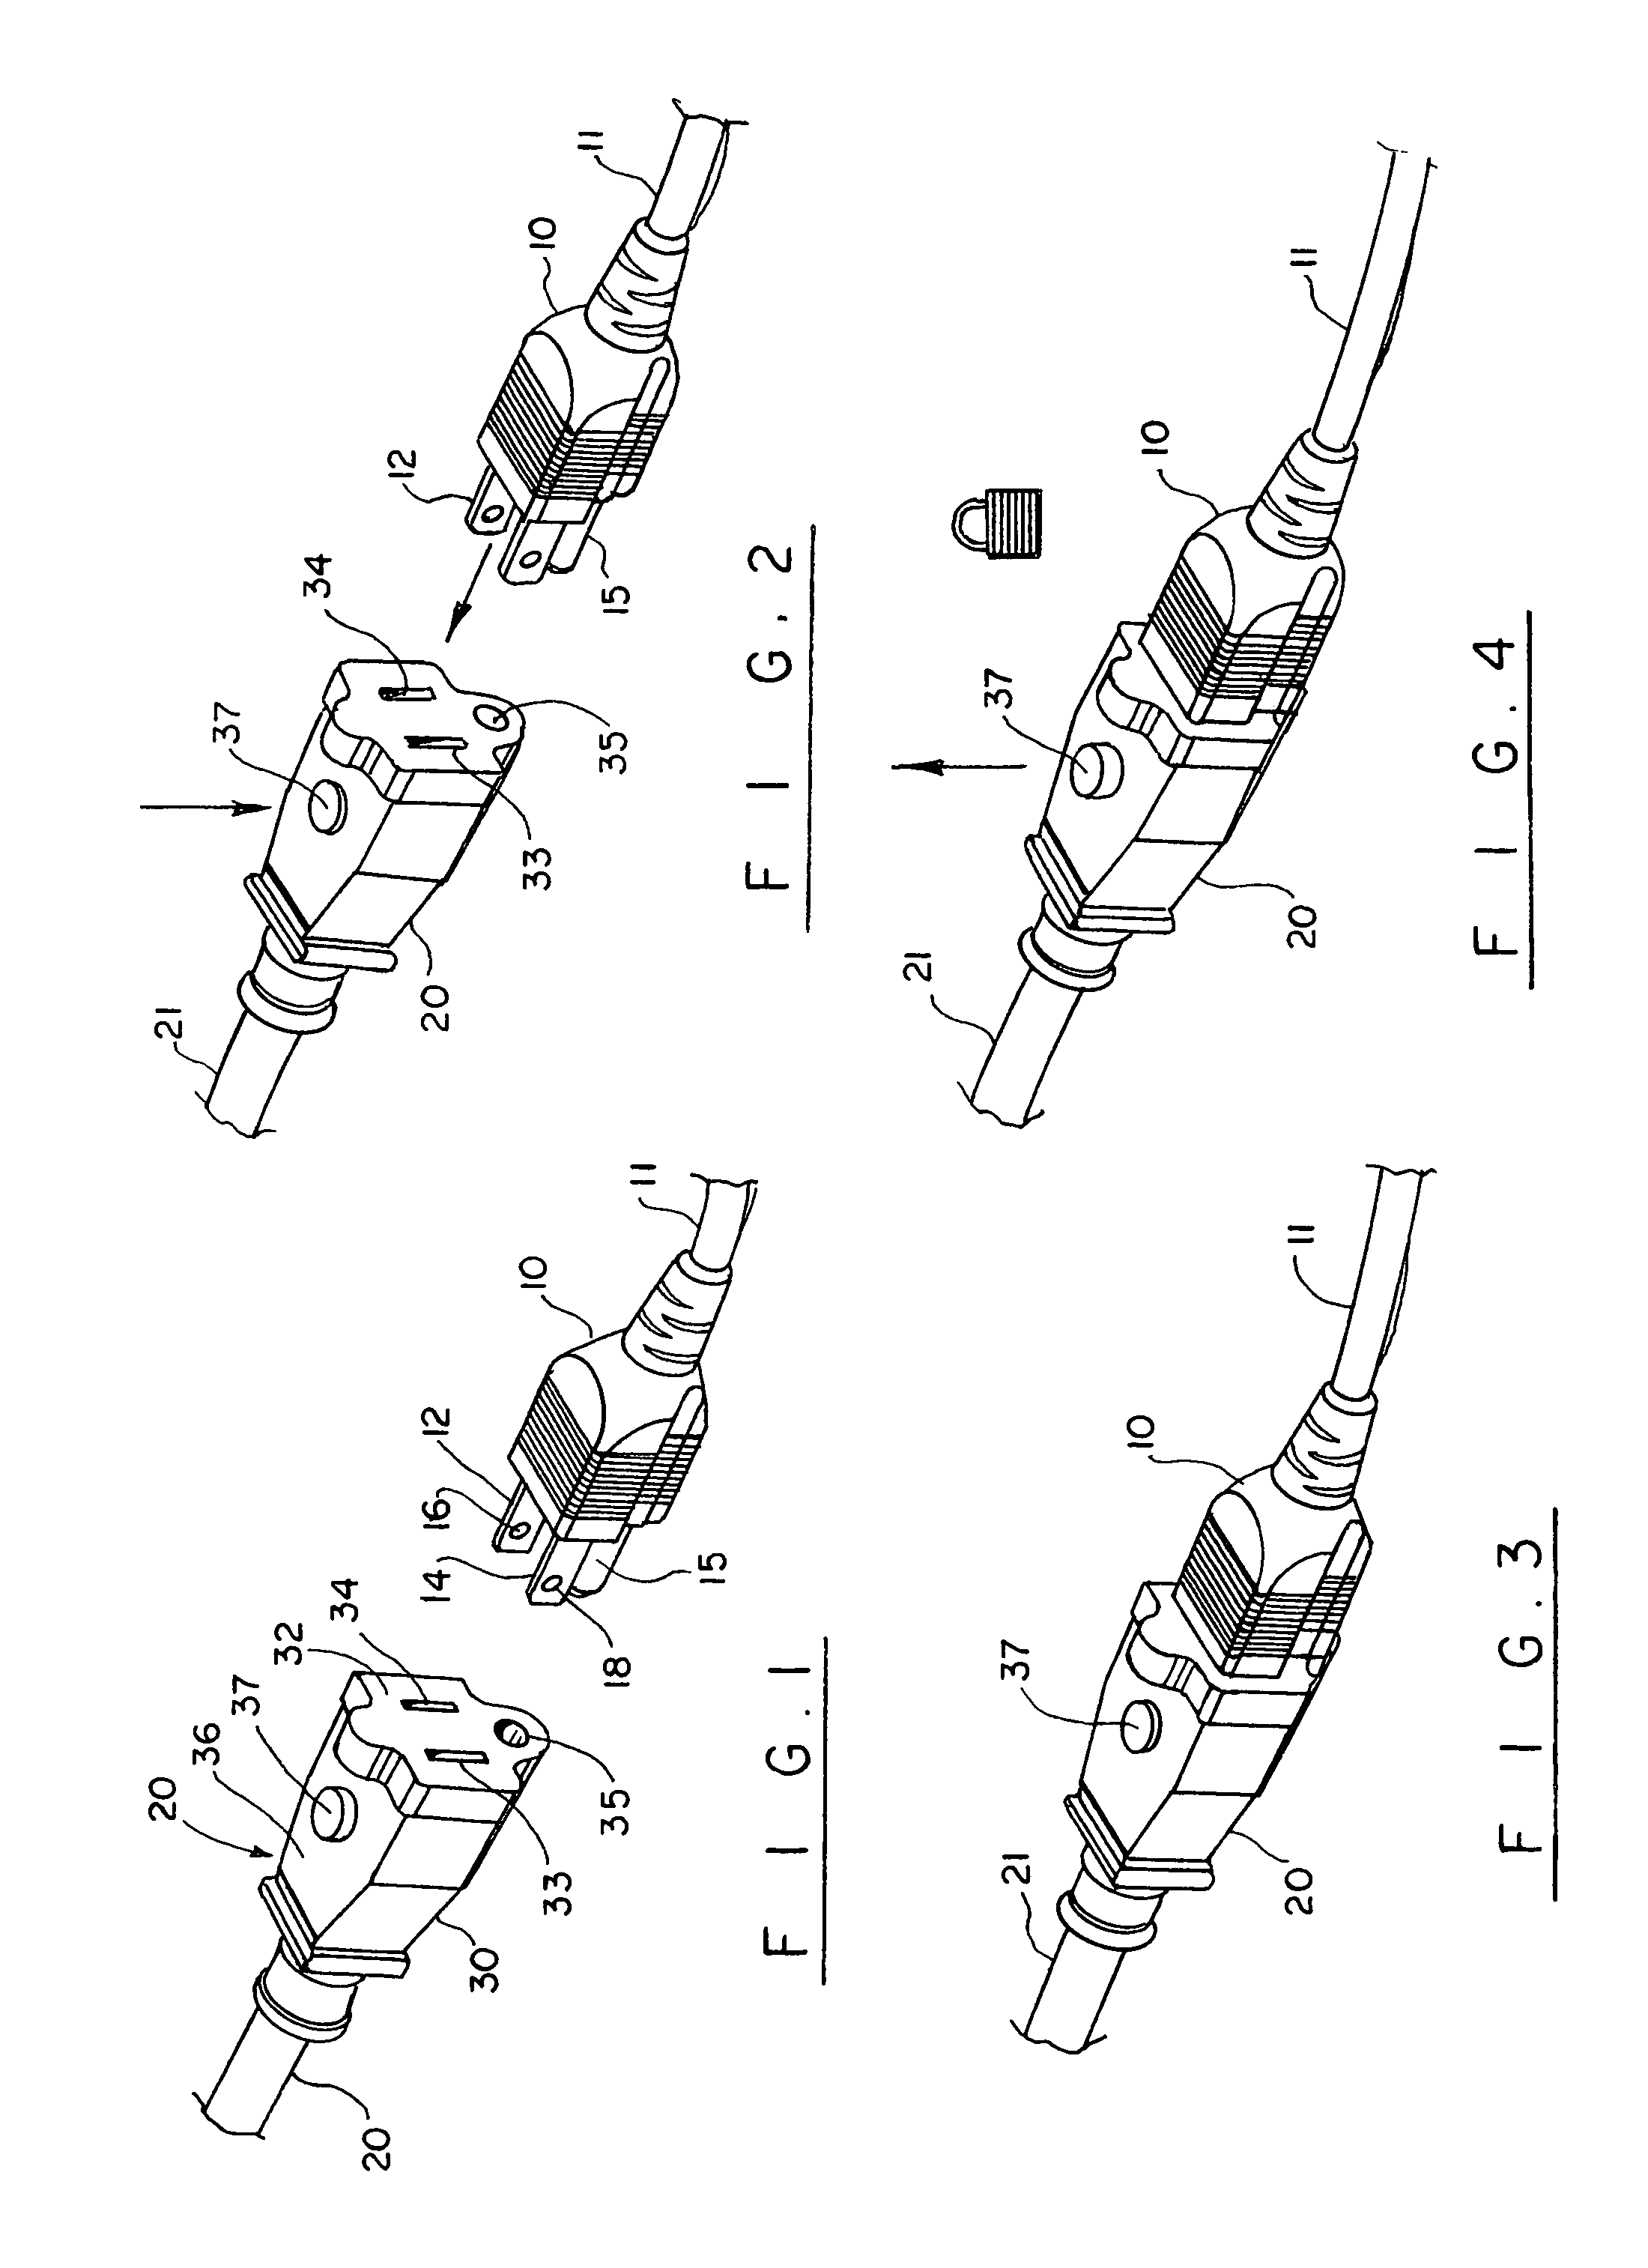 Electrical connector lock